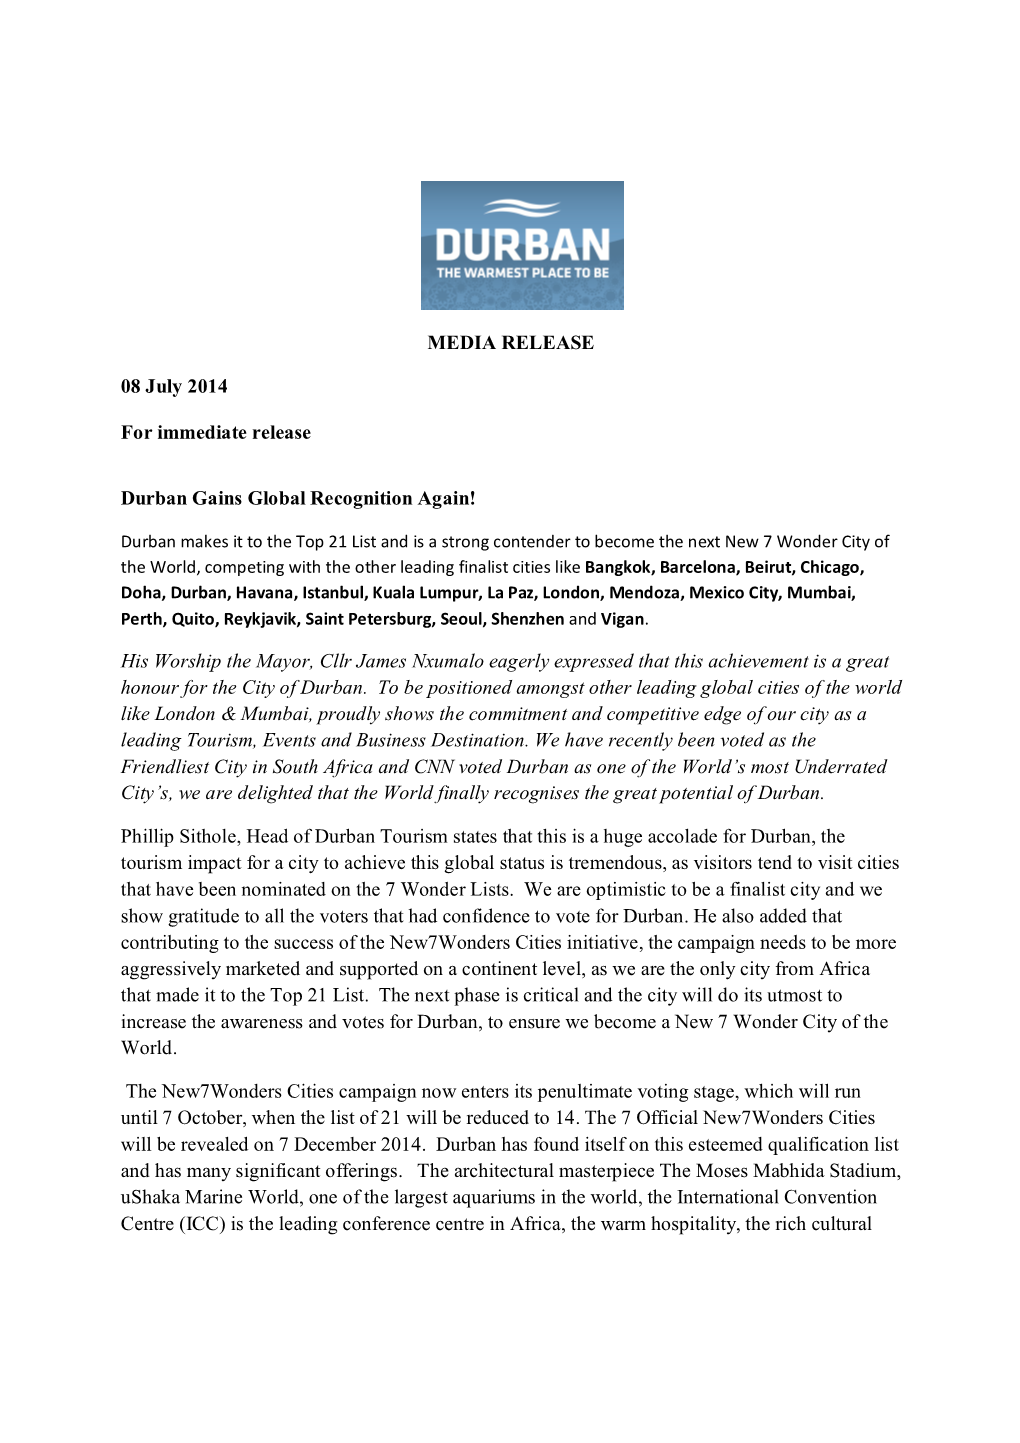 PRESS RELEASE Durban Gains Global Recognition Again 8 July 2014